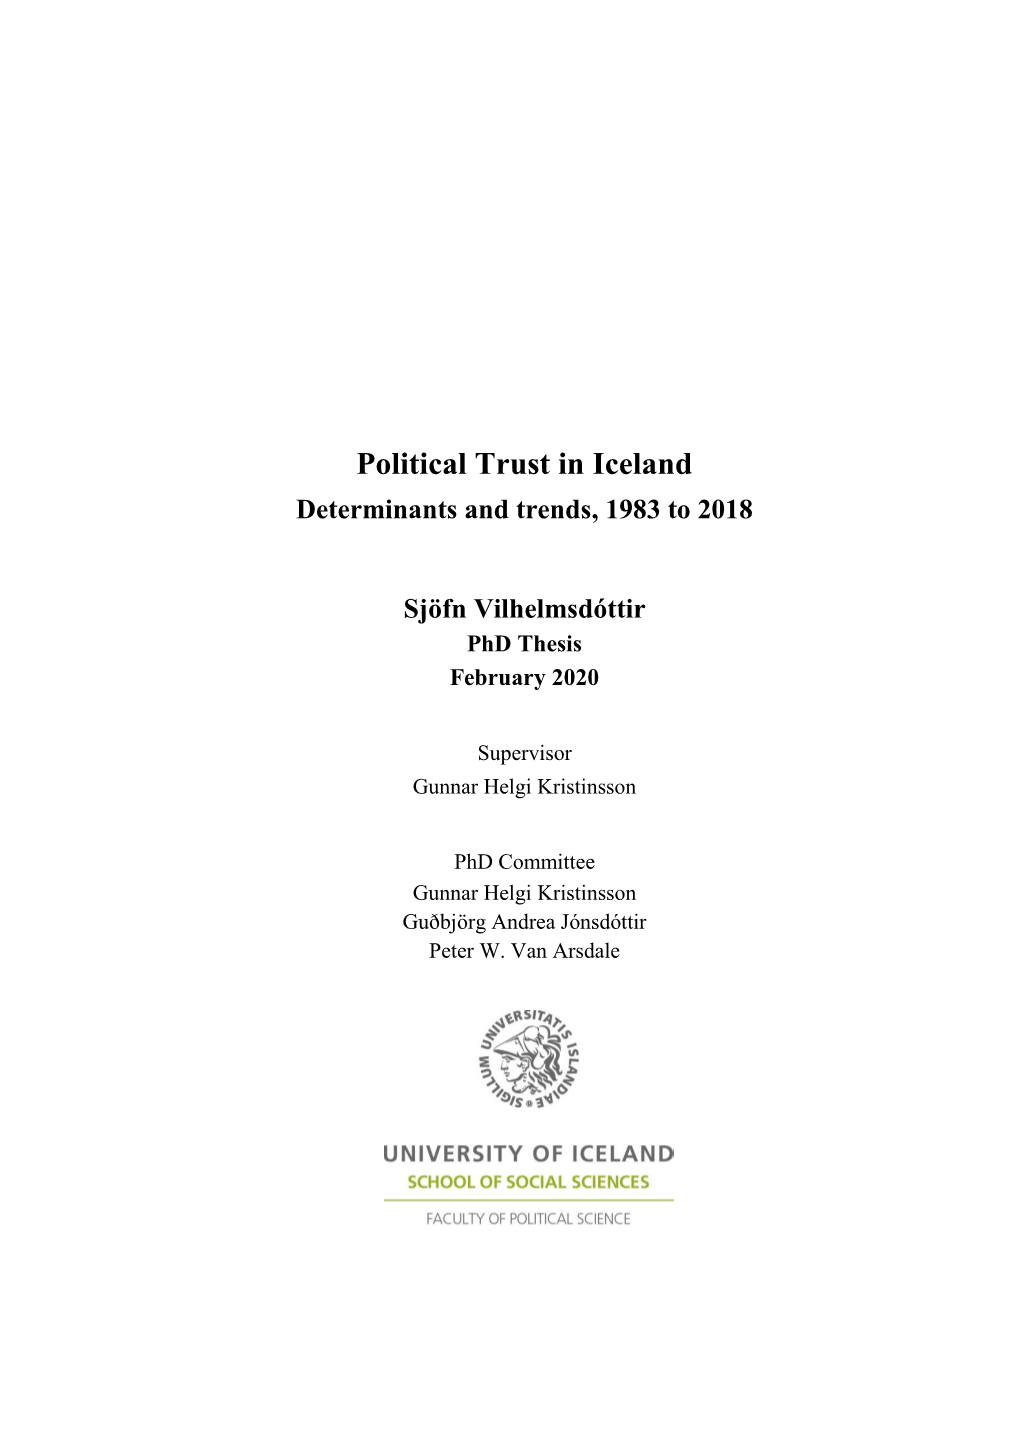 Political Trust in Iceland Determinants and Trends, 1983 to 2018